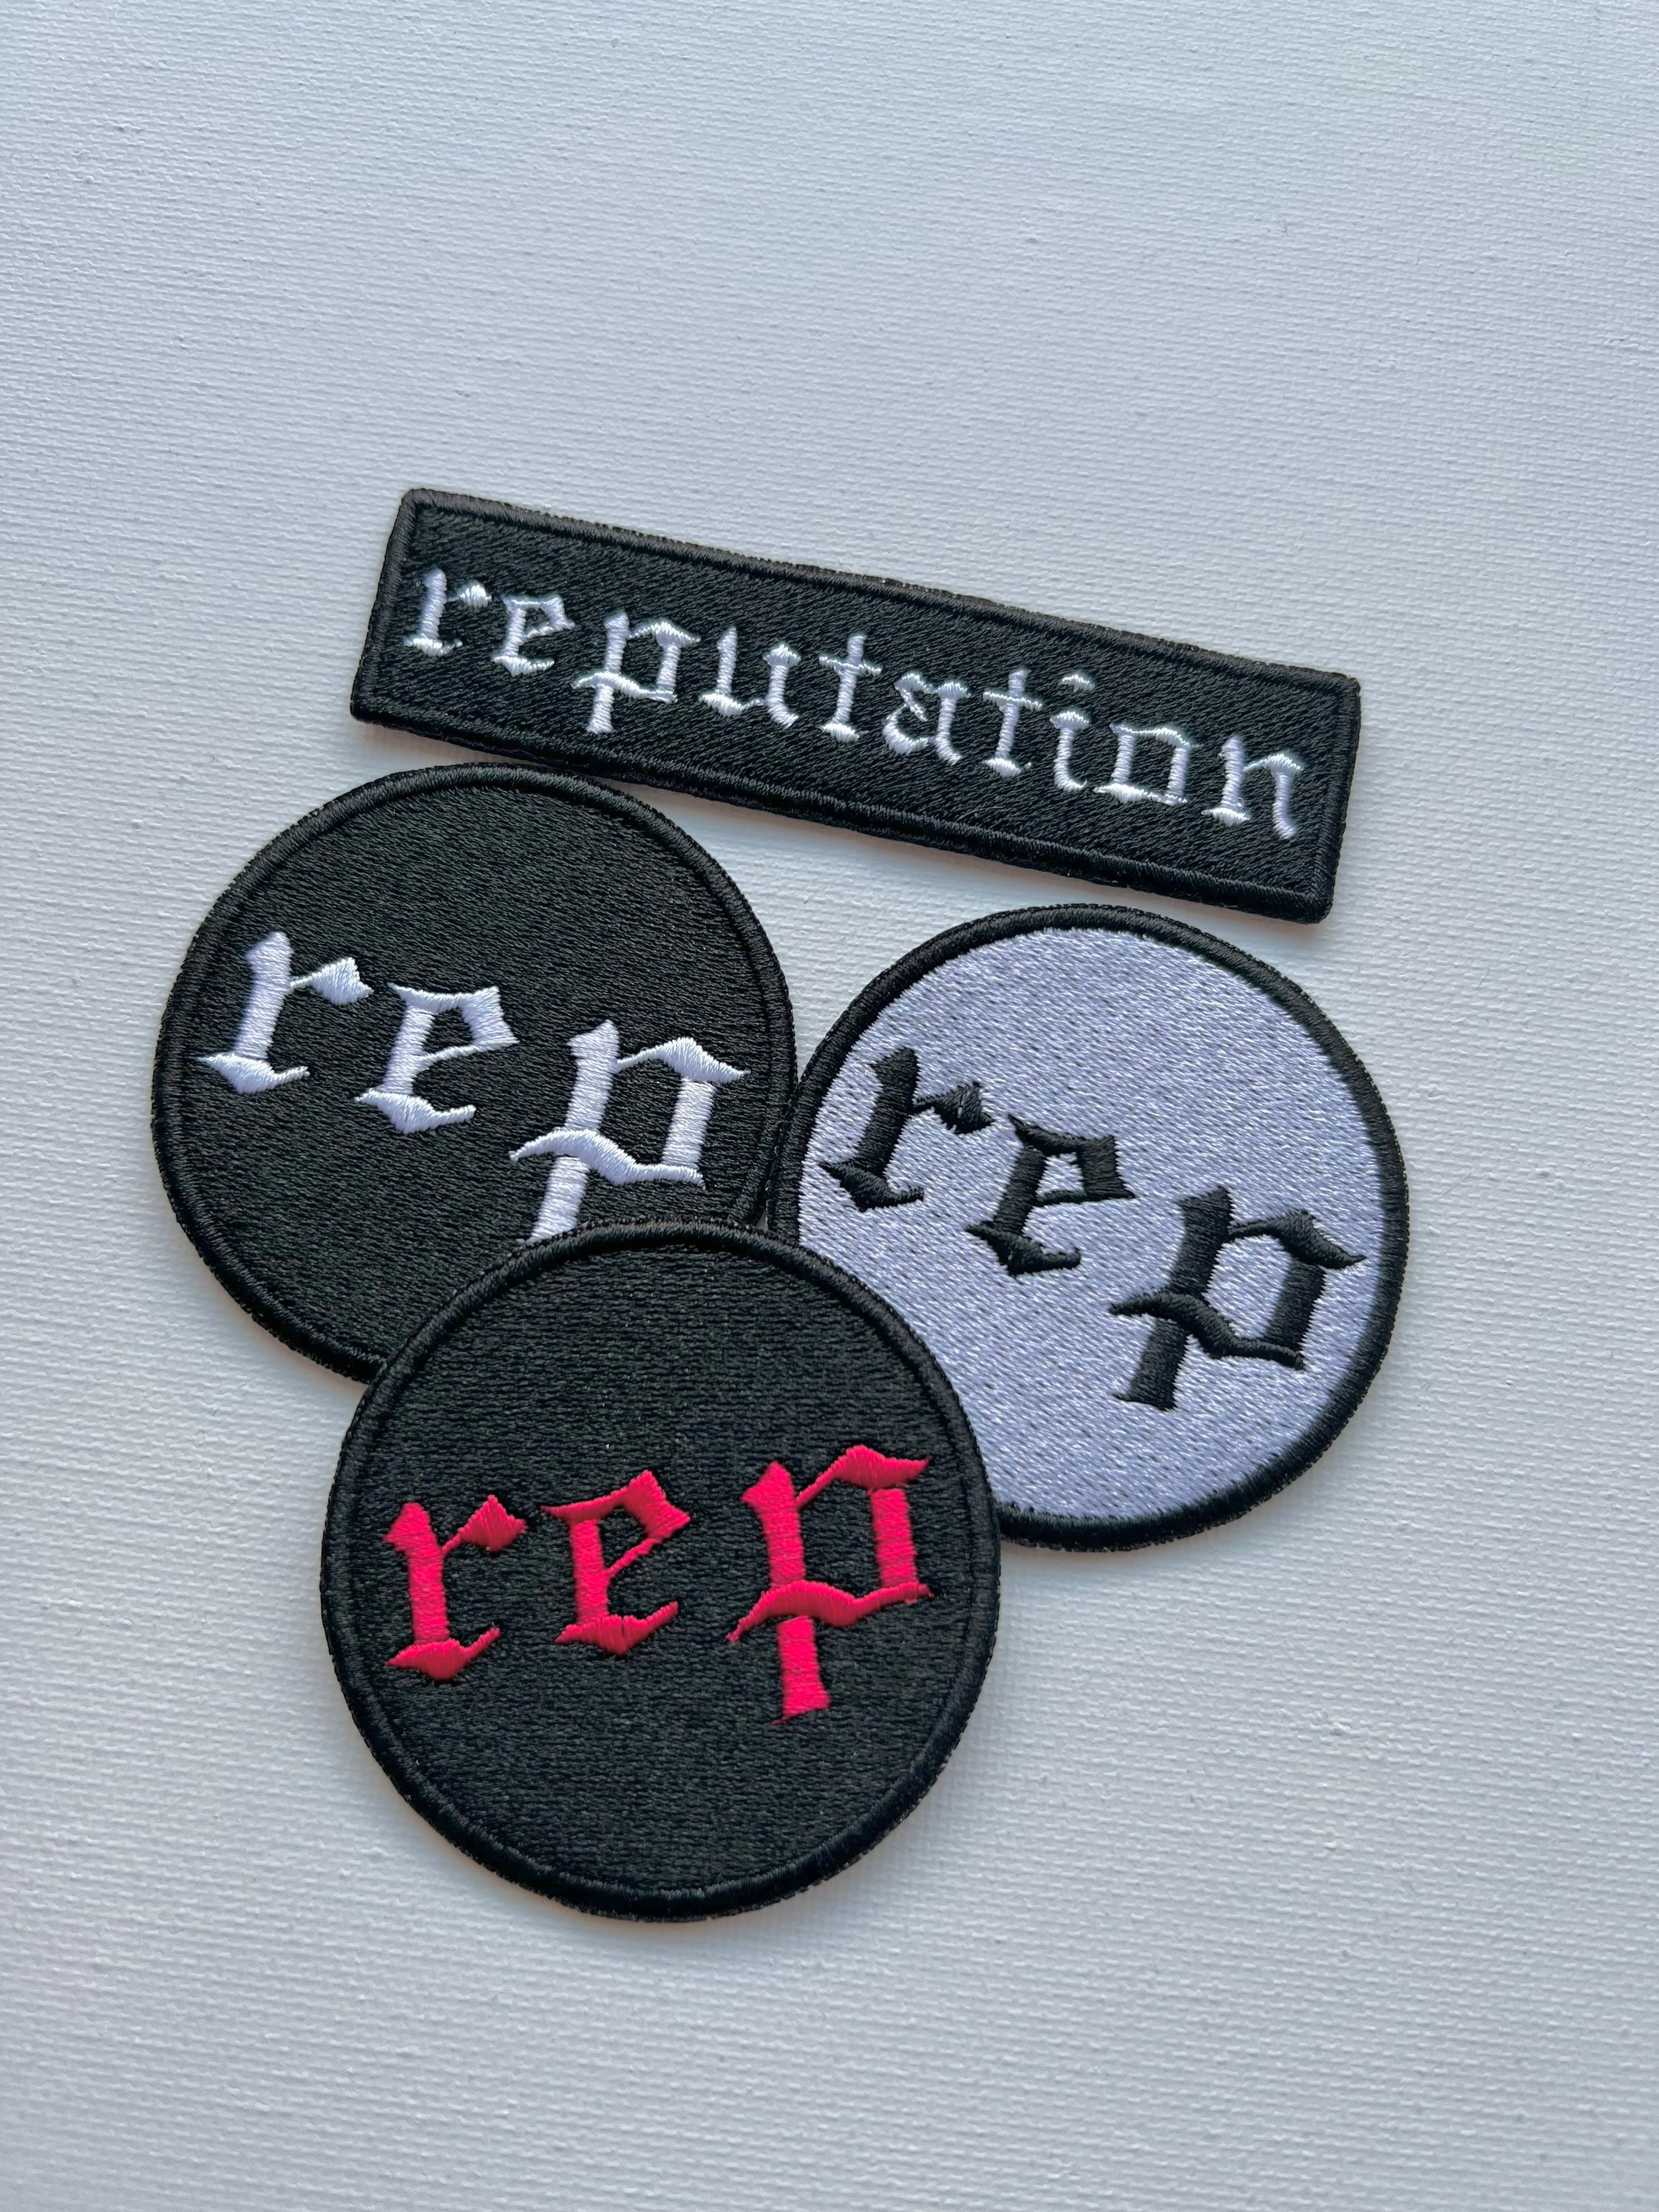 does anyone know how much these rep patches are selling for currently? :  r/TaylorSwiftMerch